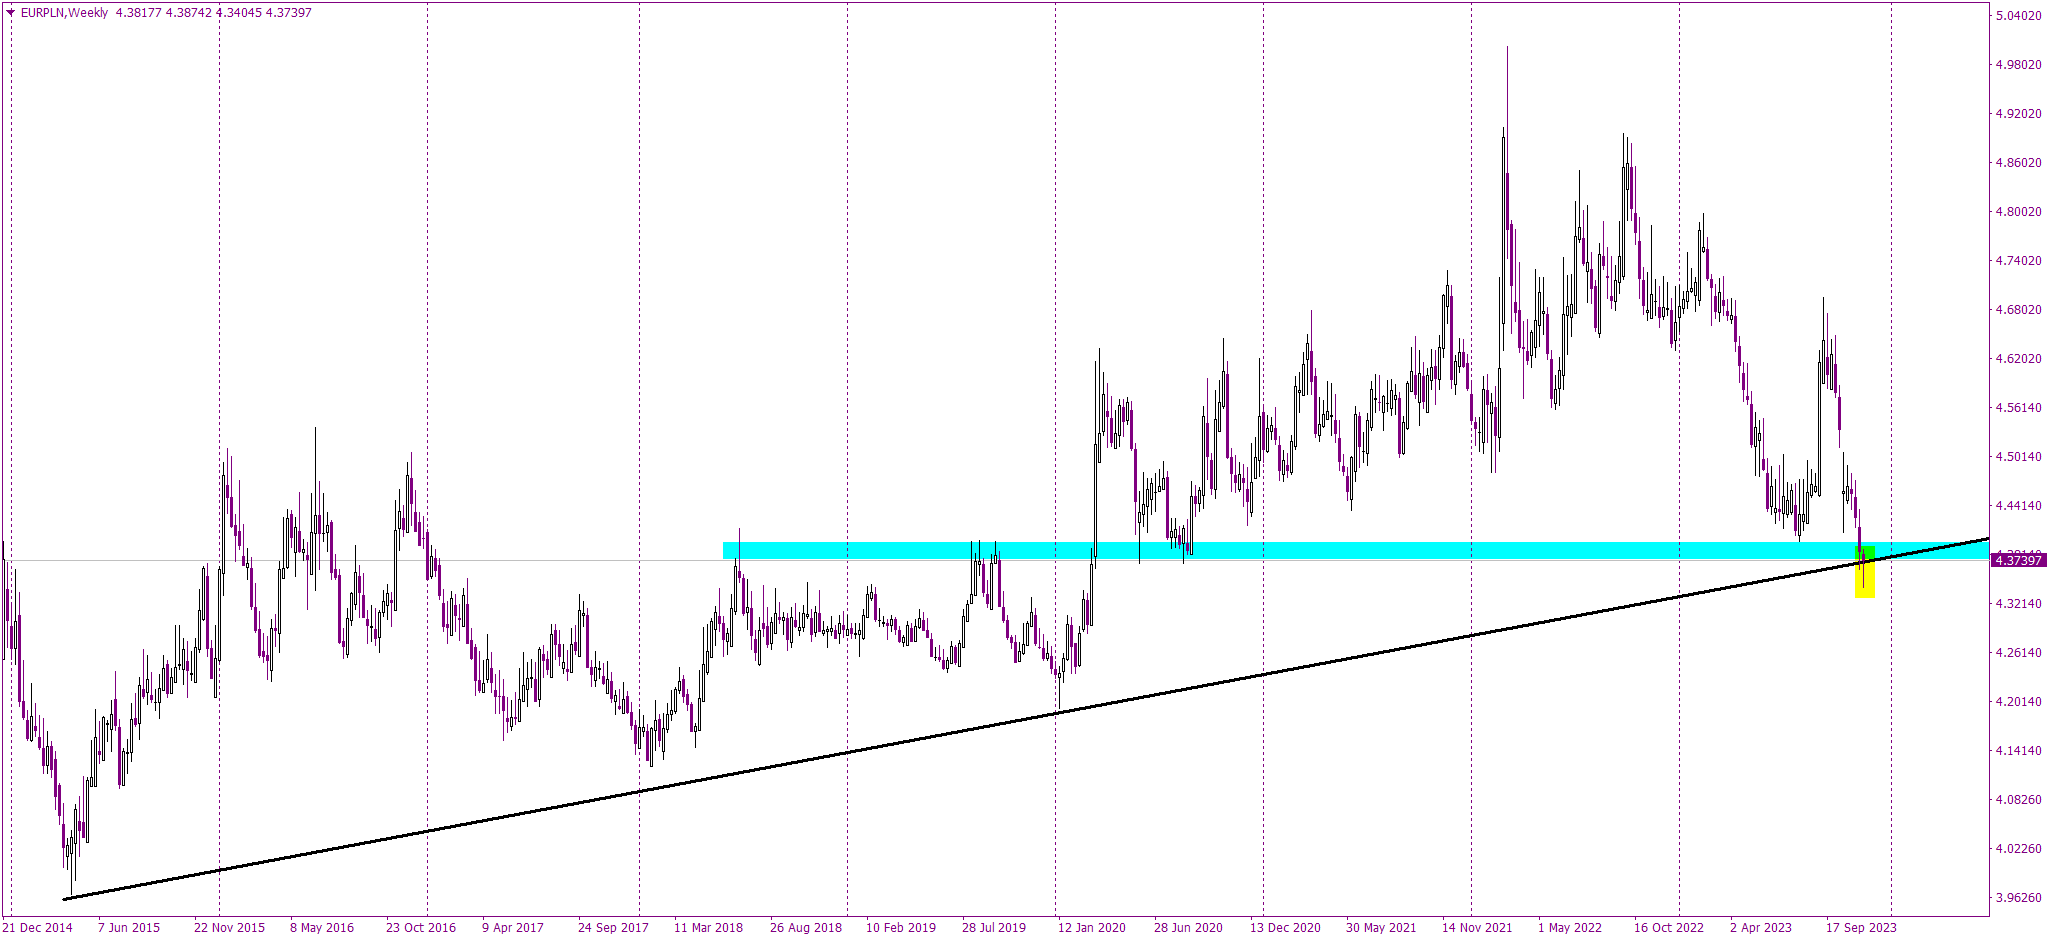 Is EURPLN Poised for a Rebound? Hammer Pattern Signals Key Shift